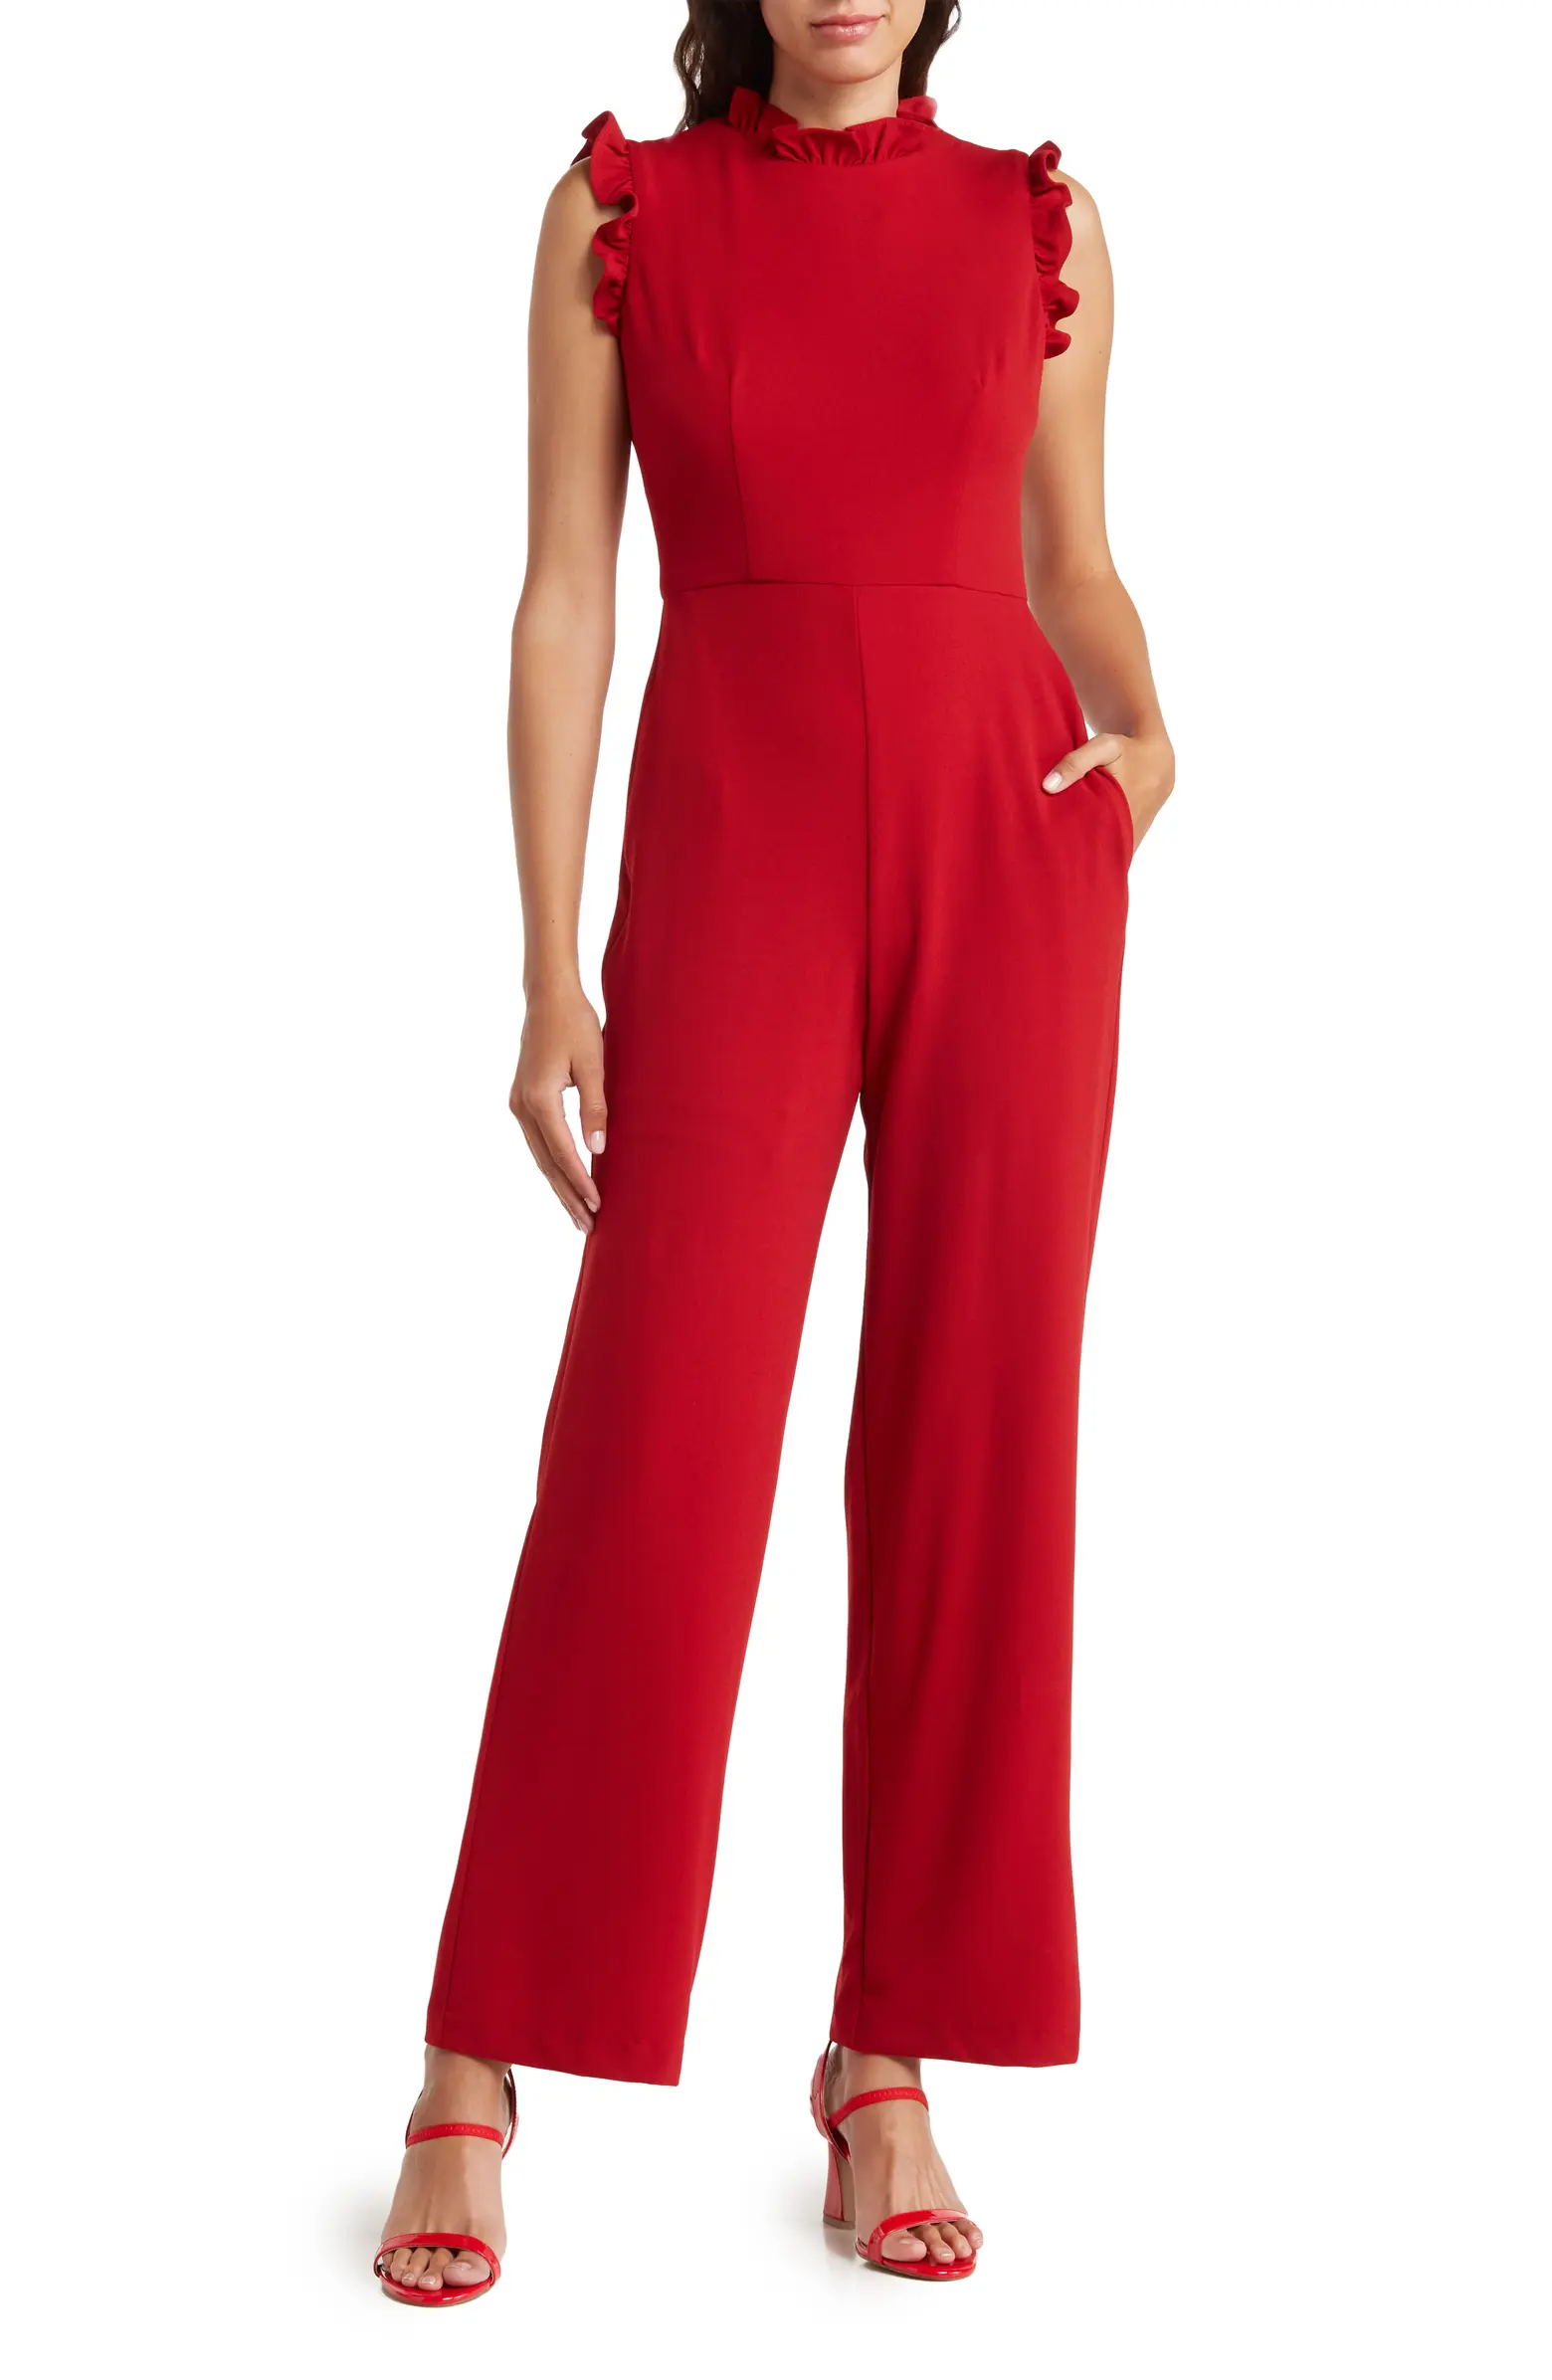 The Best Jumpsuits for Every Body Type - PureWow